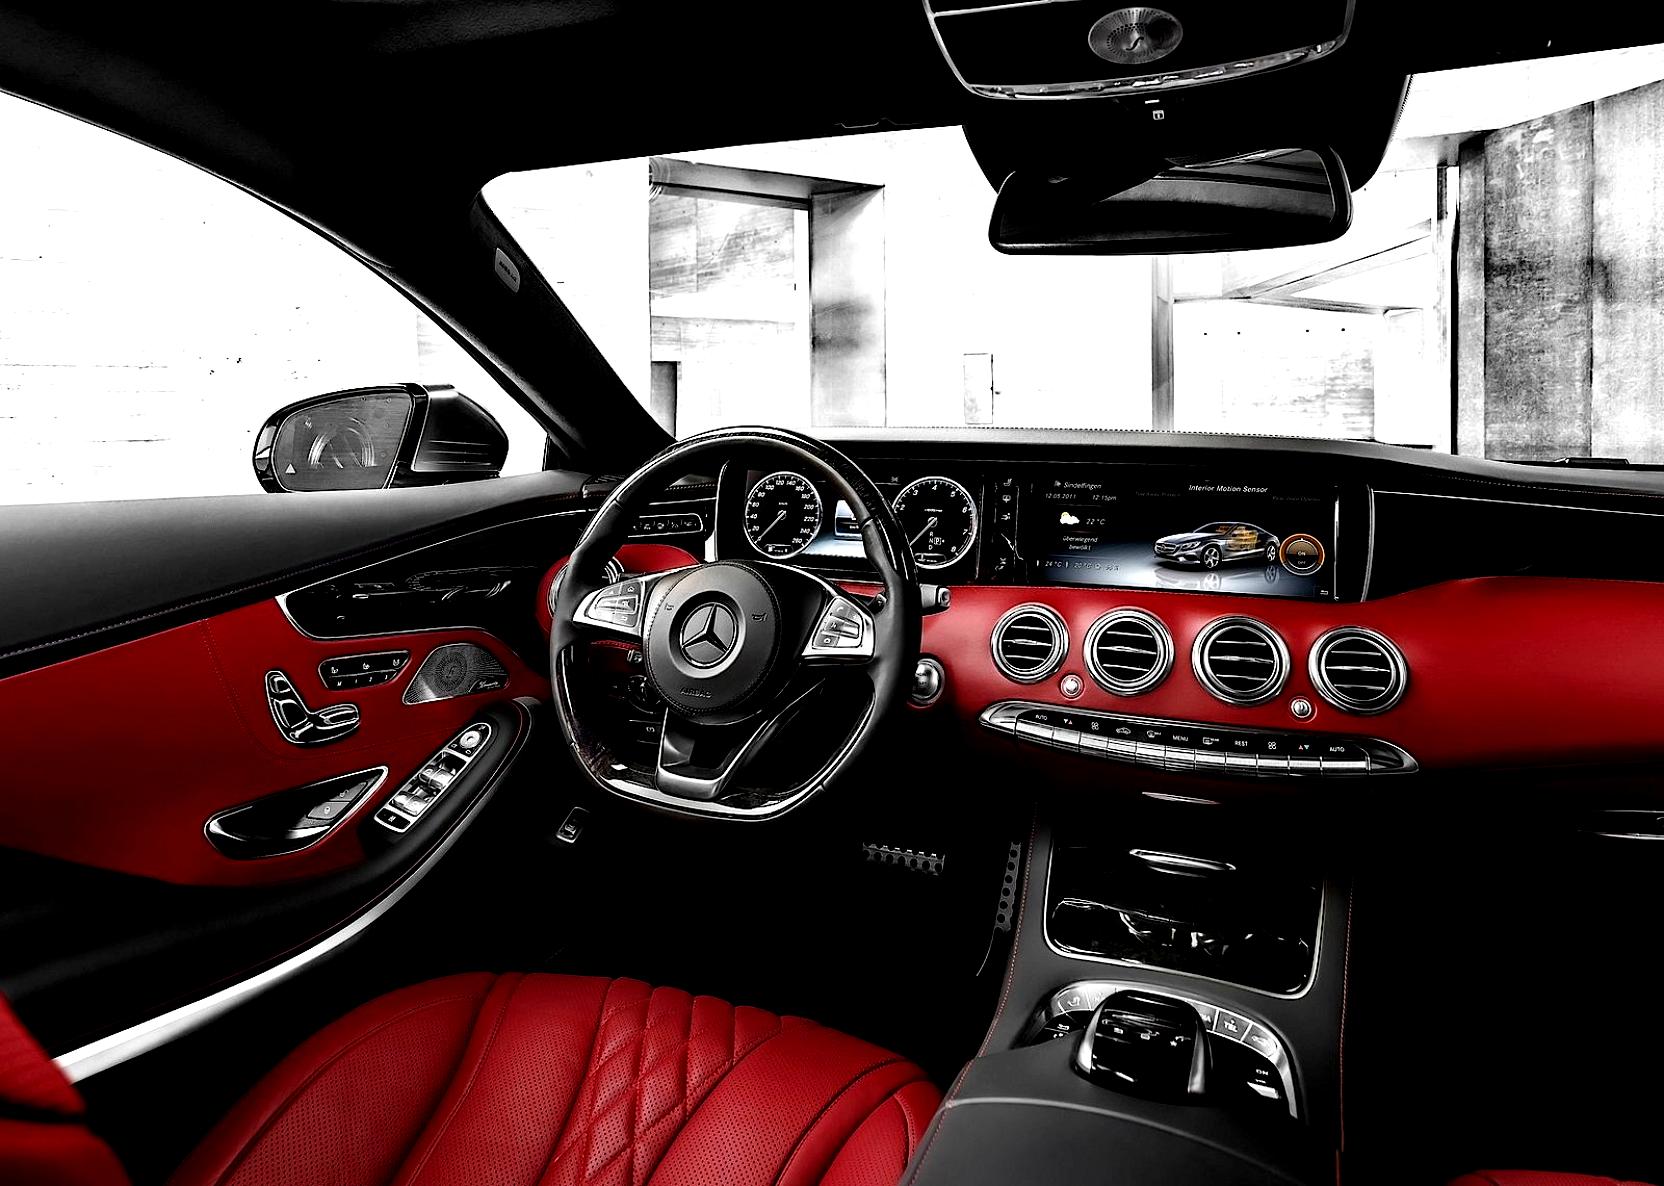 Mercedes Benz S 63 AMG Coupe 2014 #67